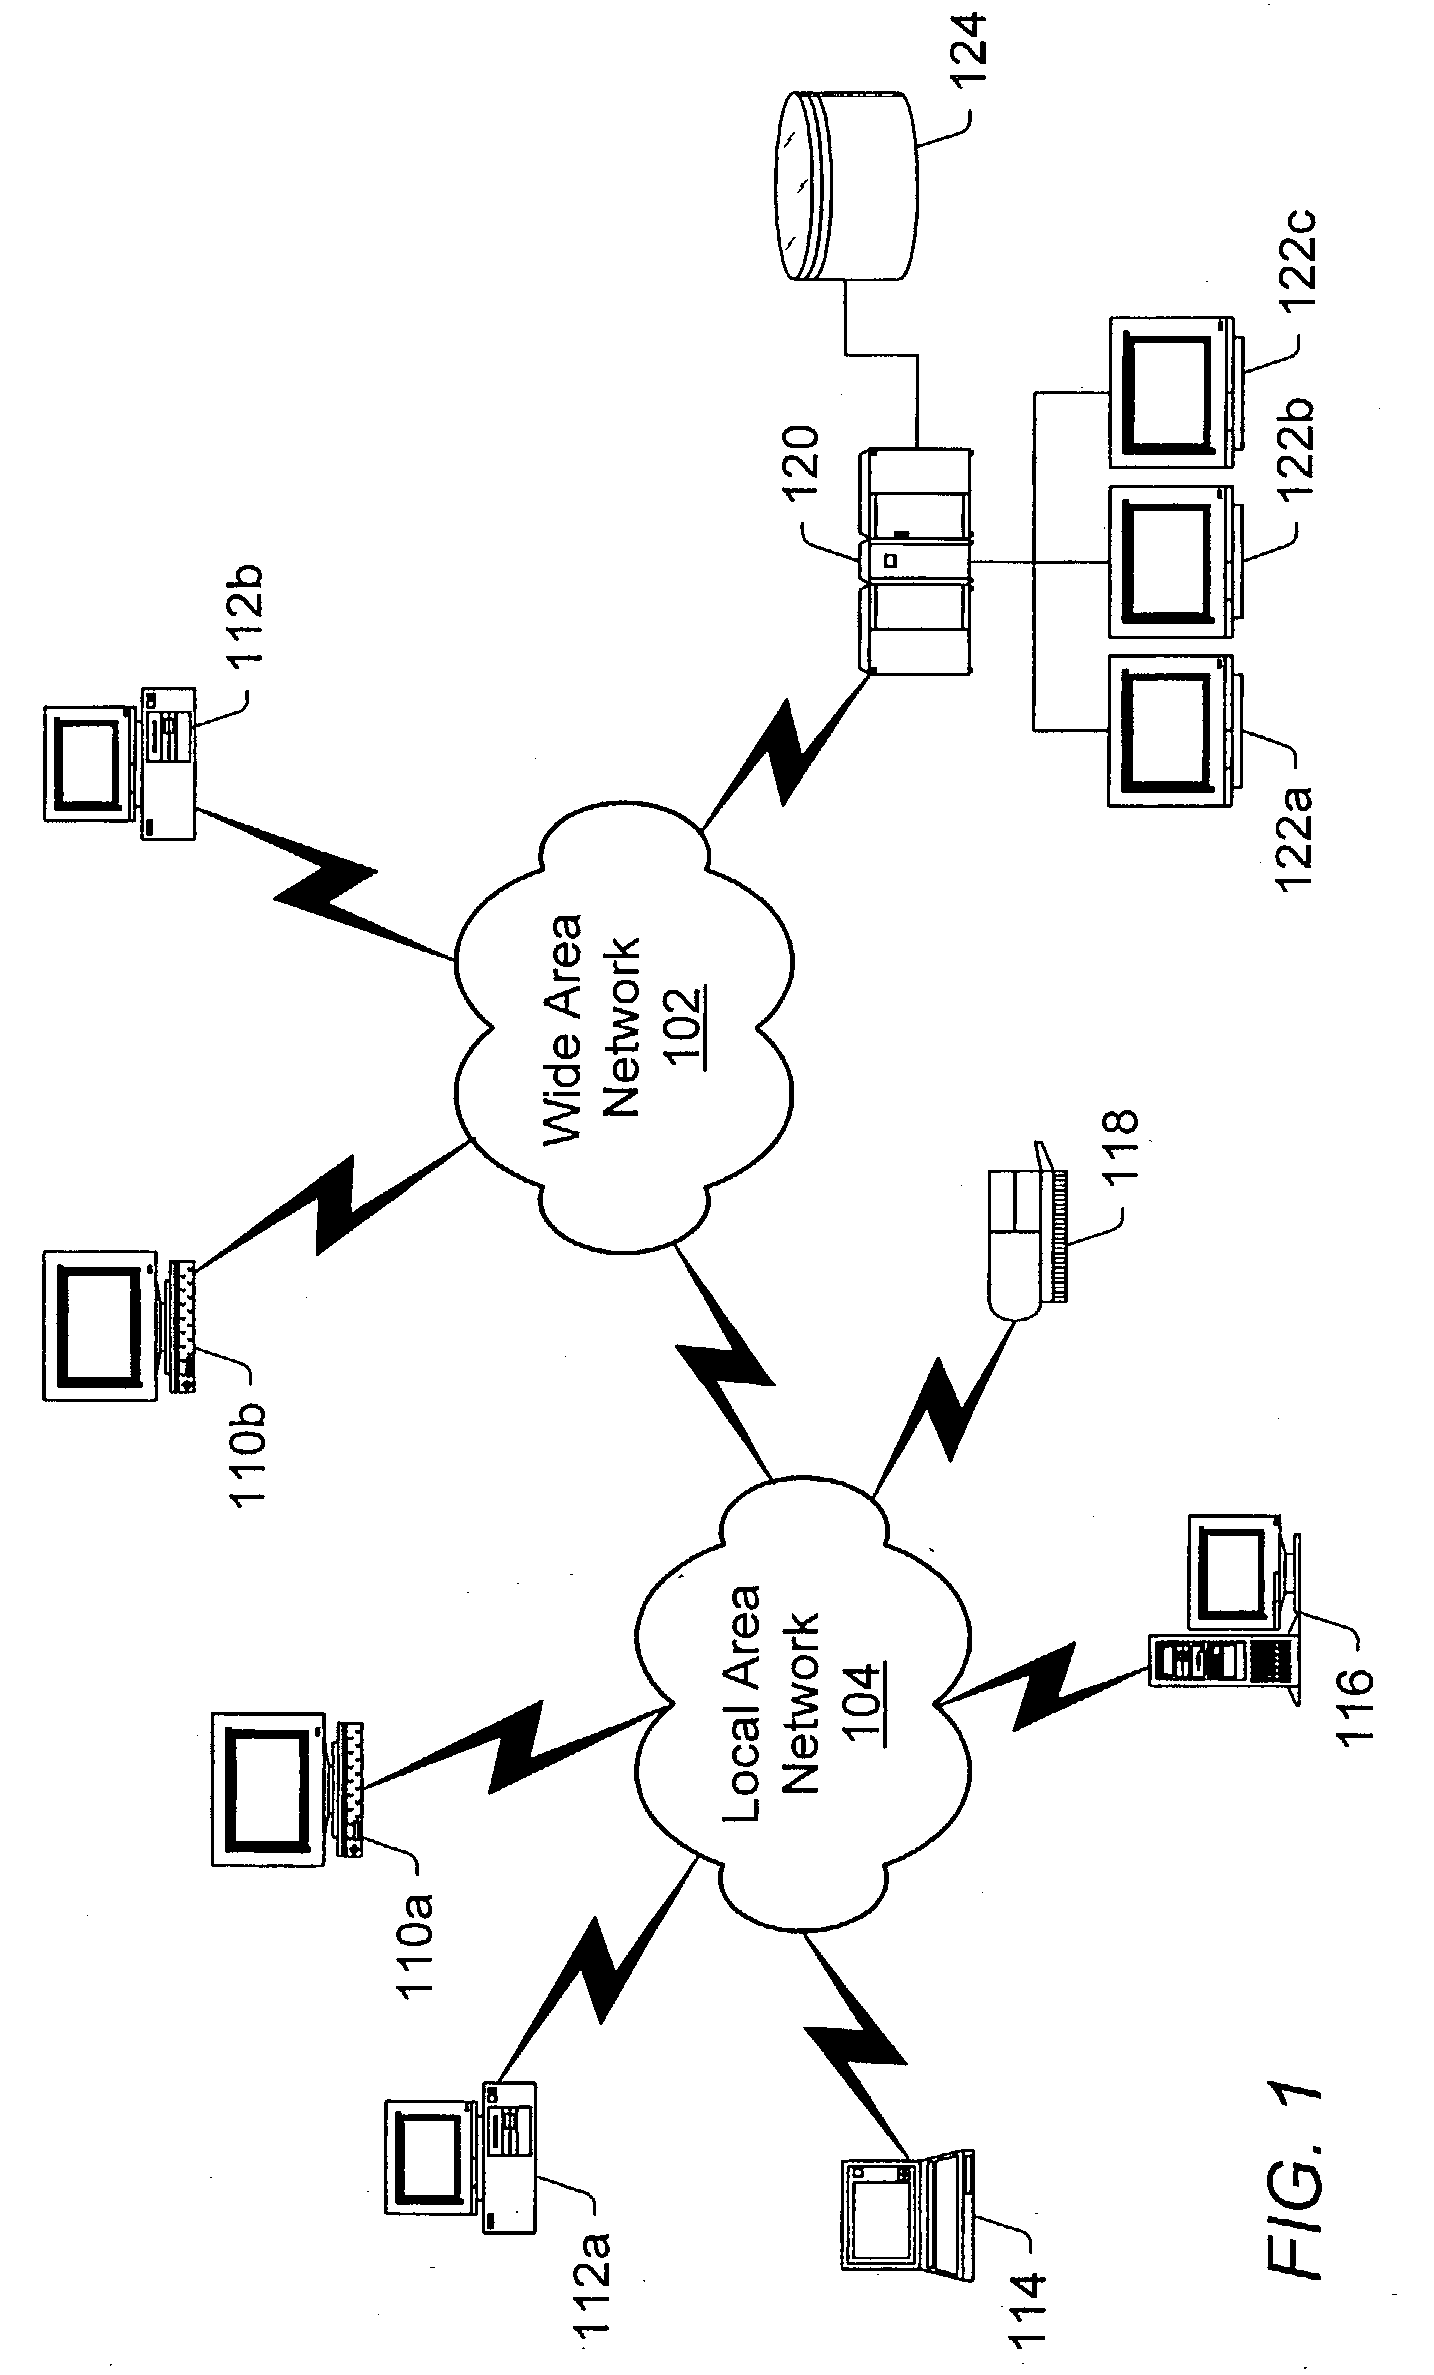 Computerized method and system for estimating an effect on liability using claim data accessed from claim reporting software